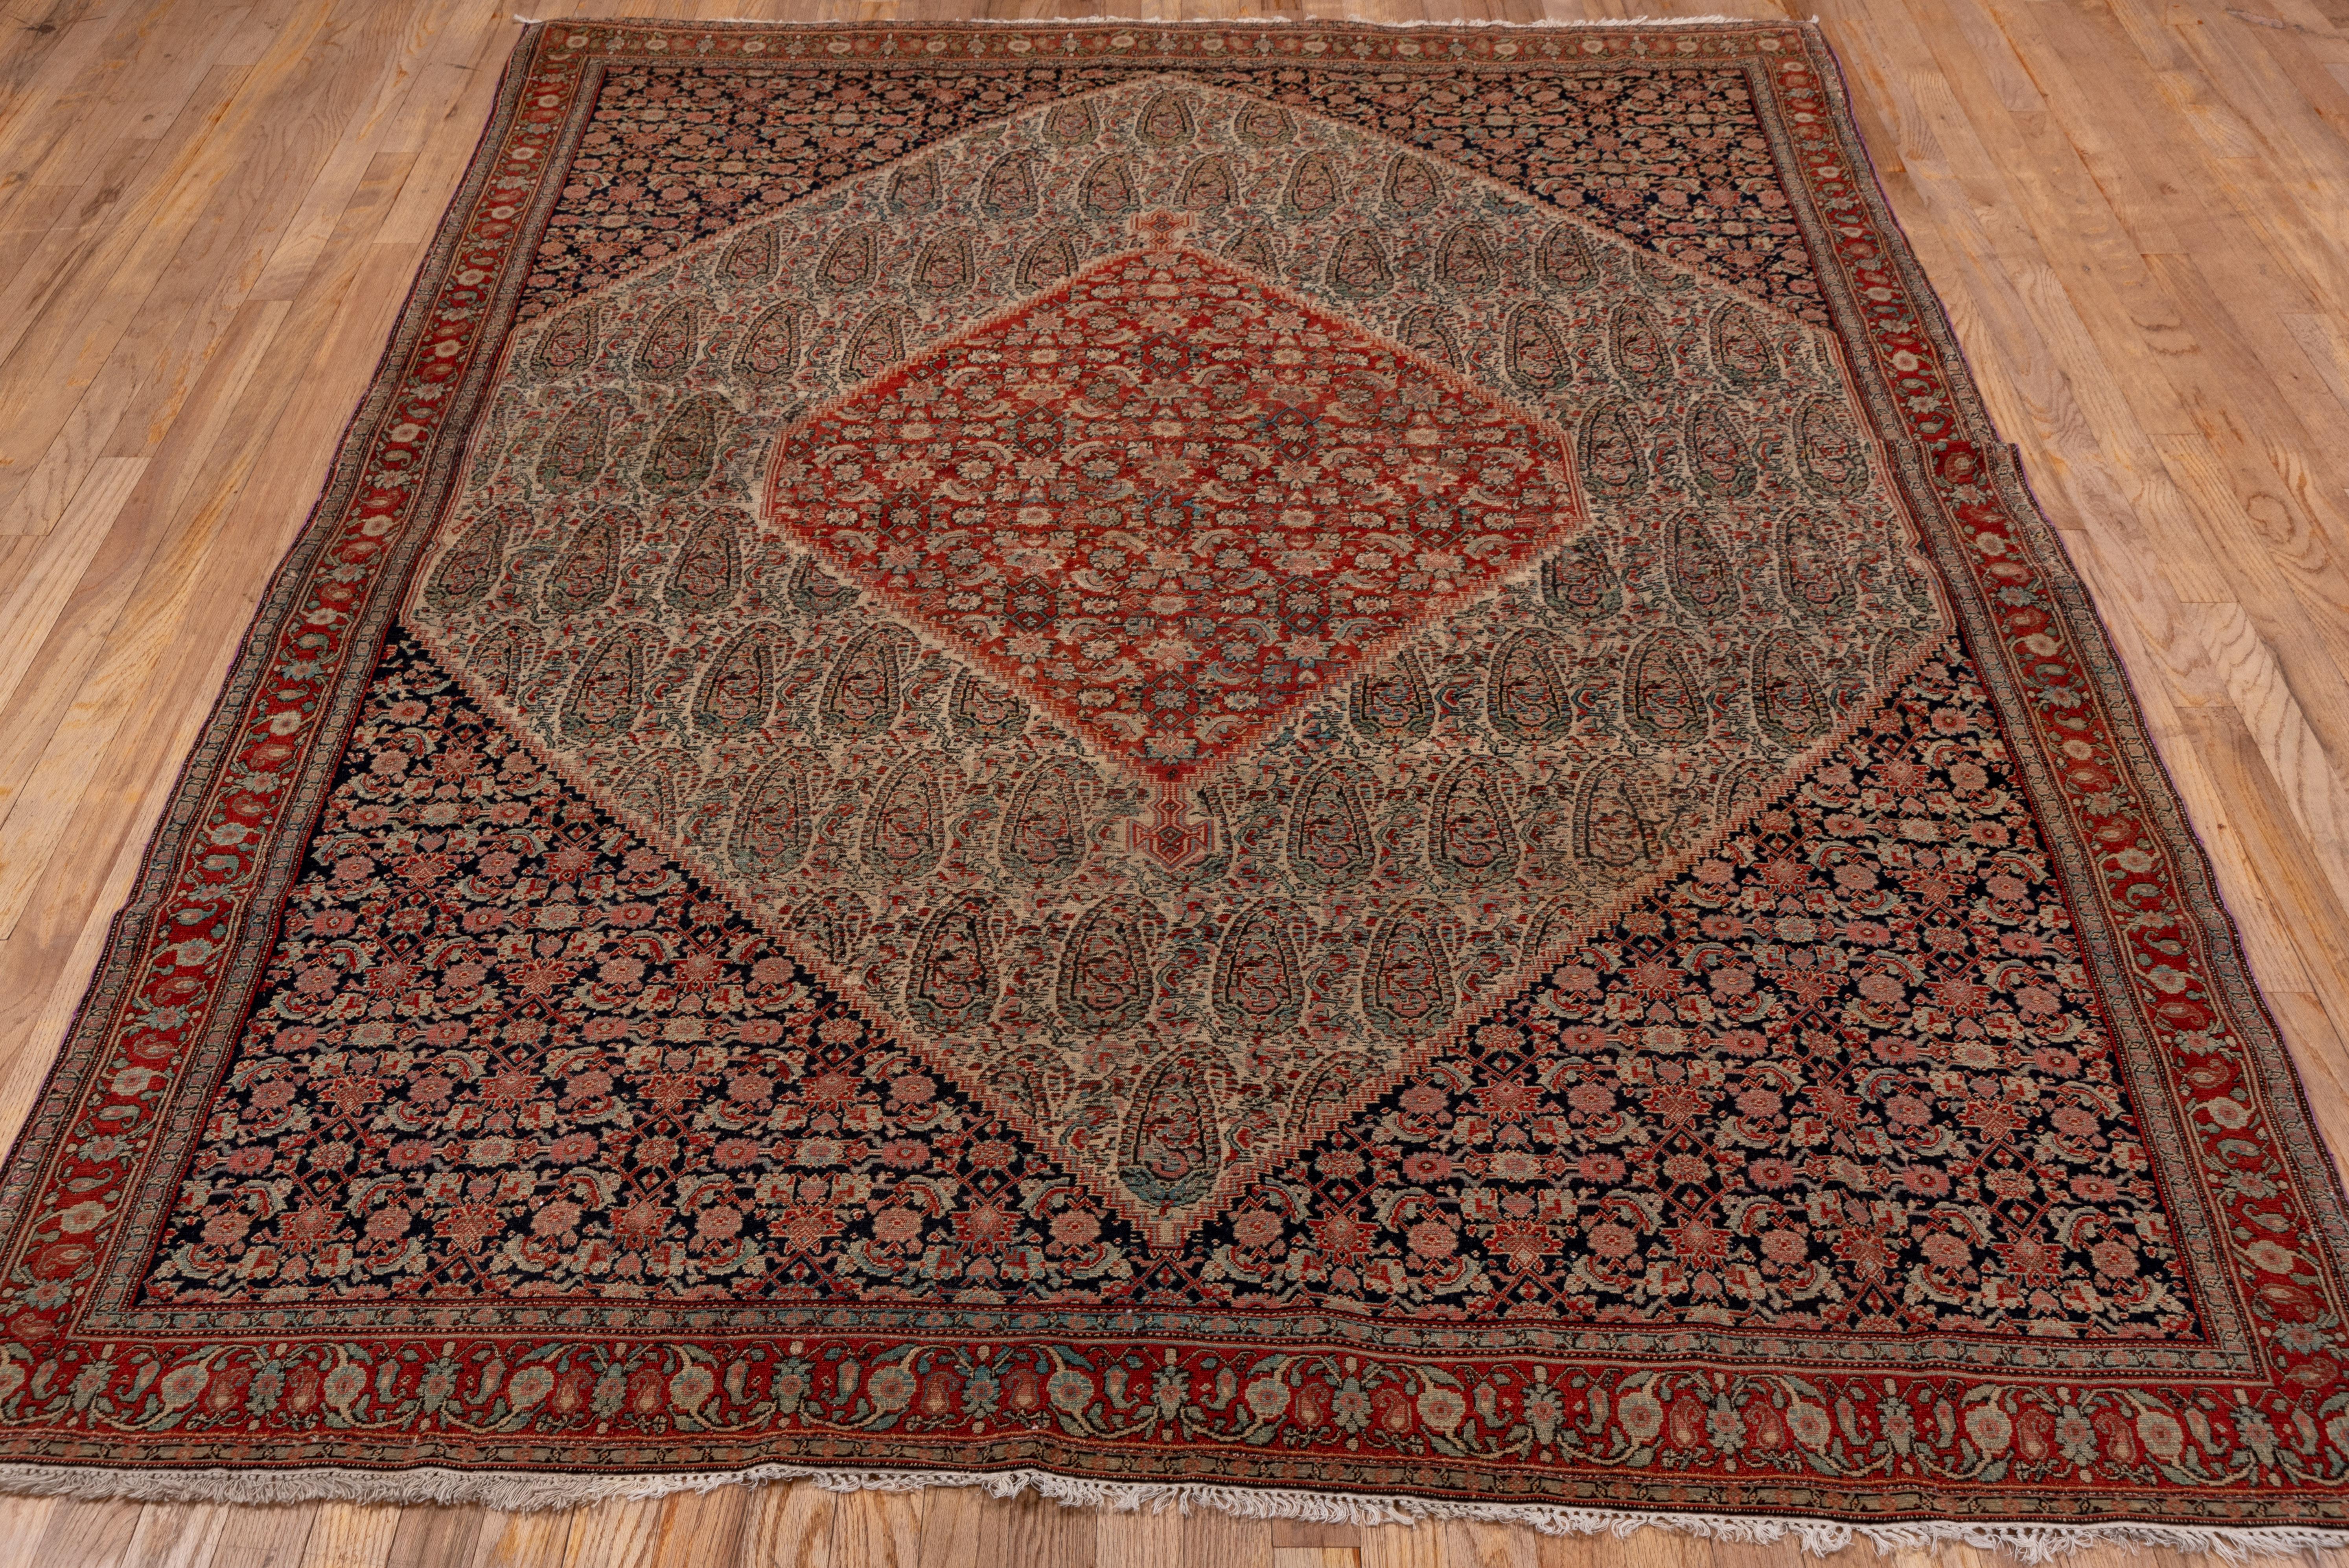 Larger than the usual Senneh scatter, this NW Persian finely woven Kurdish city rug shows an invariant Herati design in the red medallion and navy corners, with large complex botehs in the cream field between. Red rosette and boteh border.